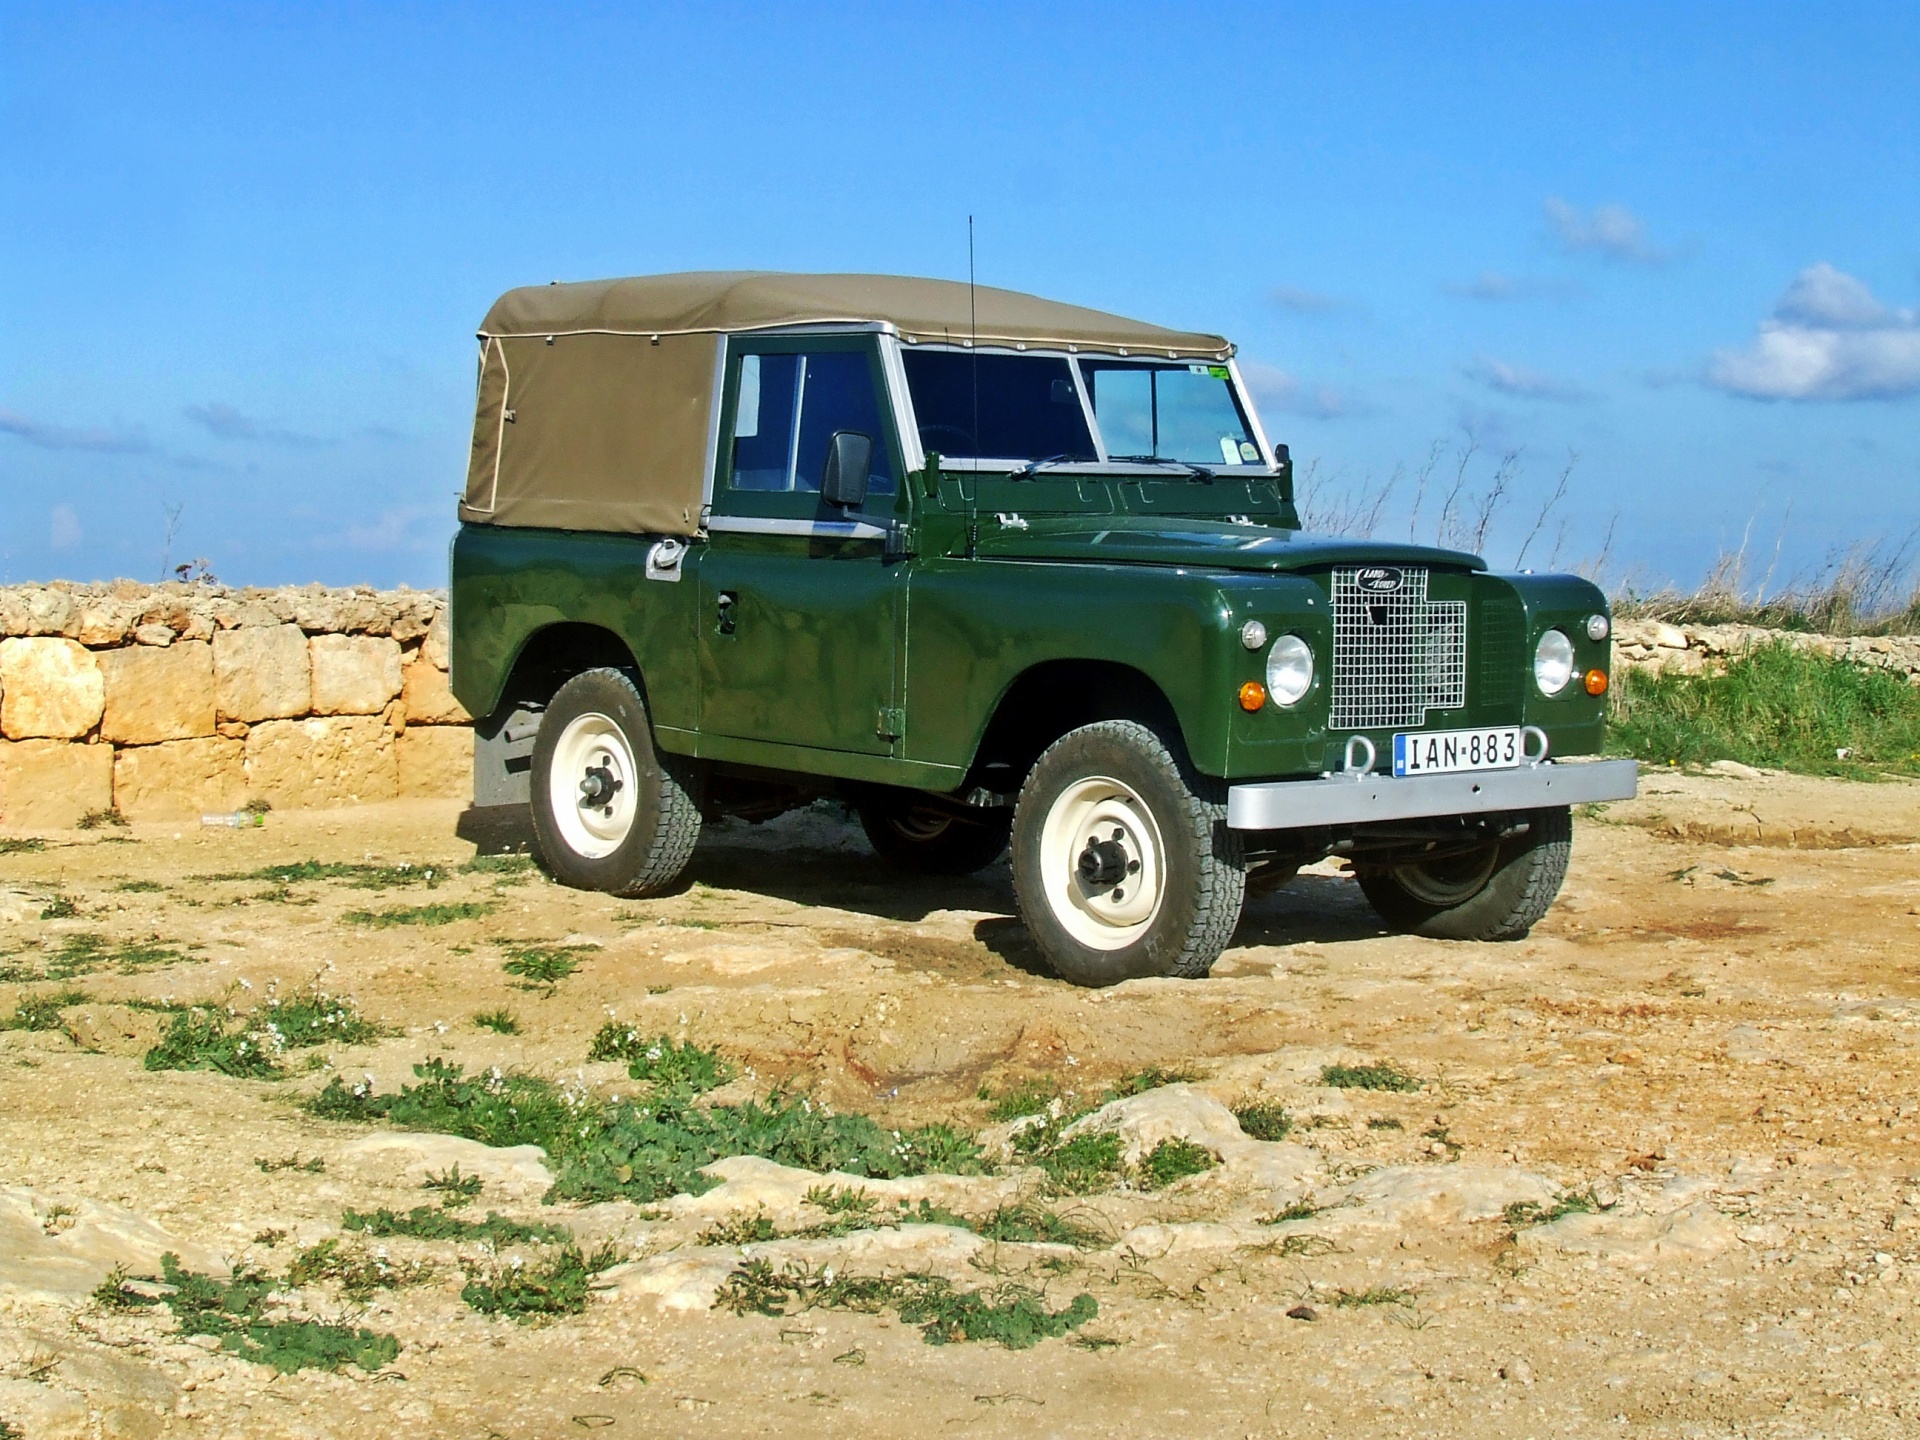 Land Rover & Stone Wall